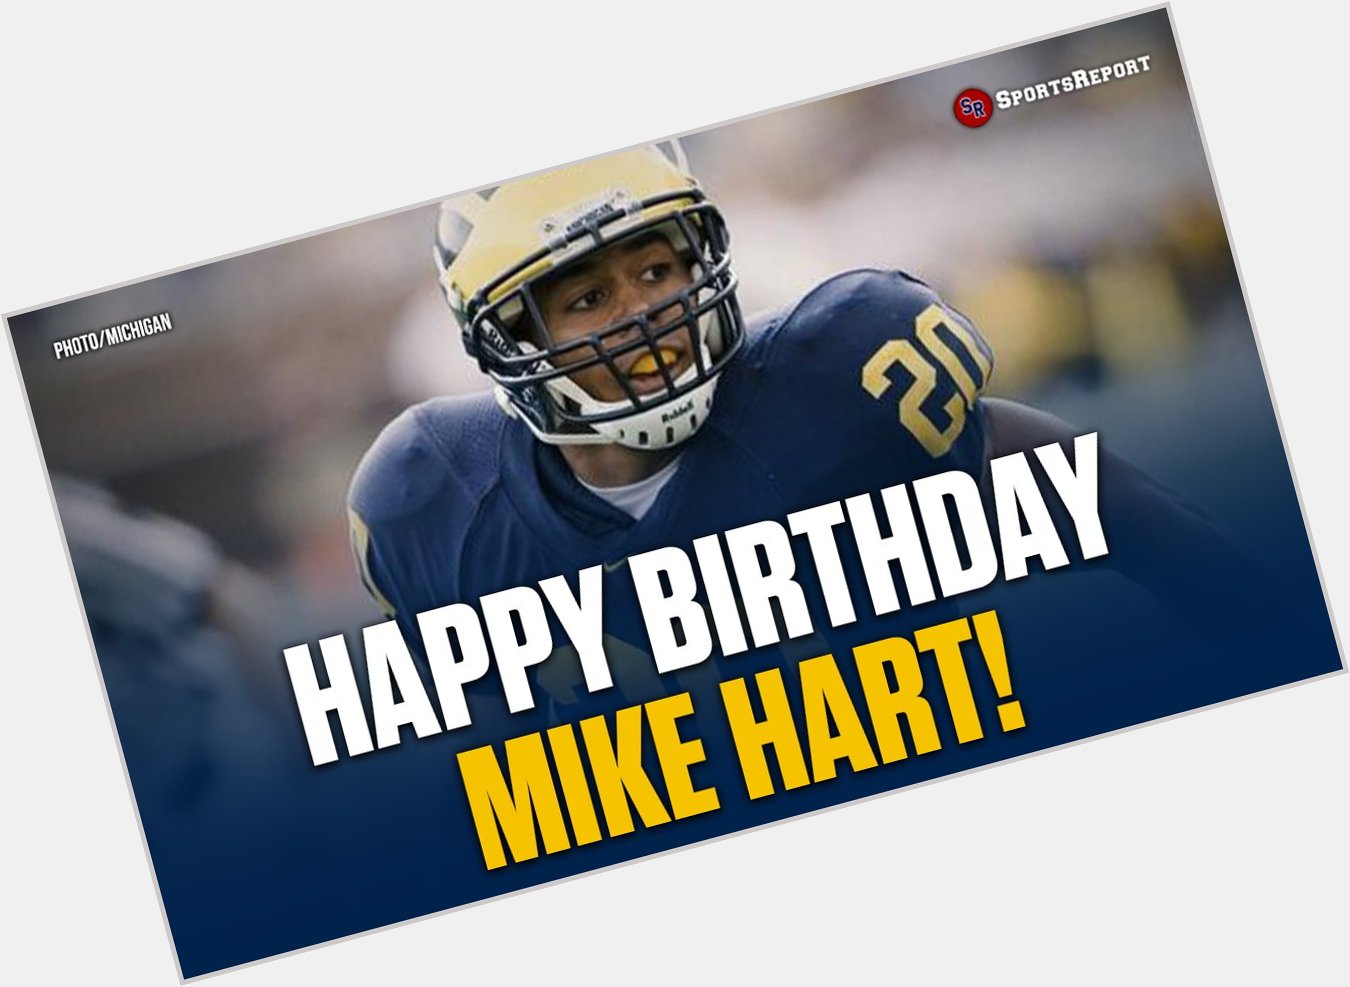  Fans, let\s wish Legend Mike Hart a Happy Birthday! 